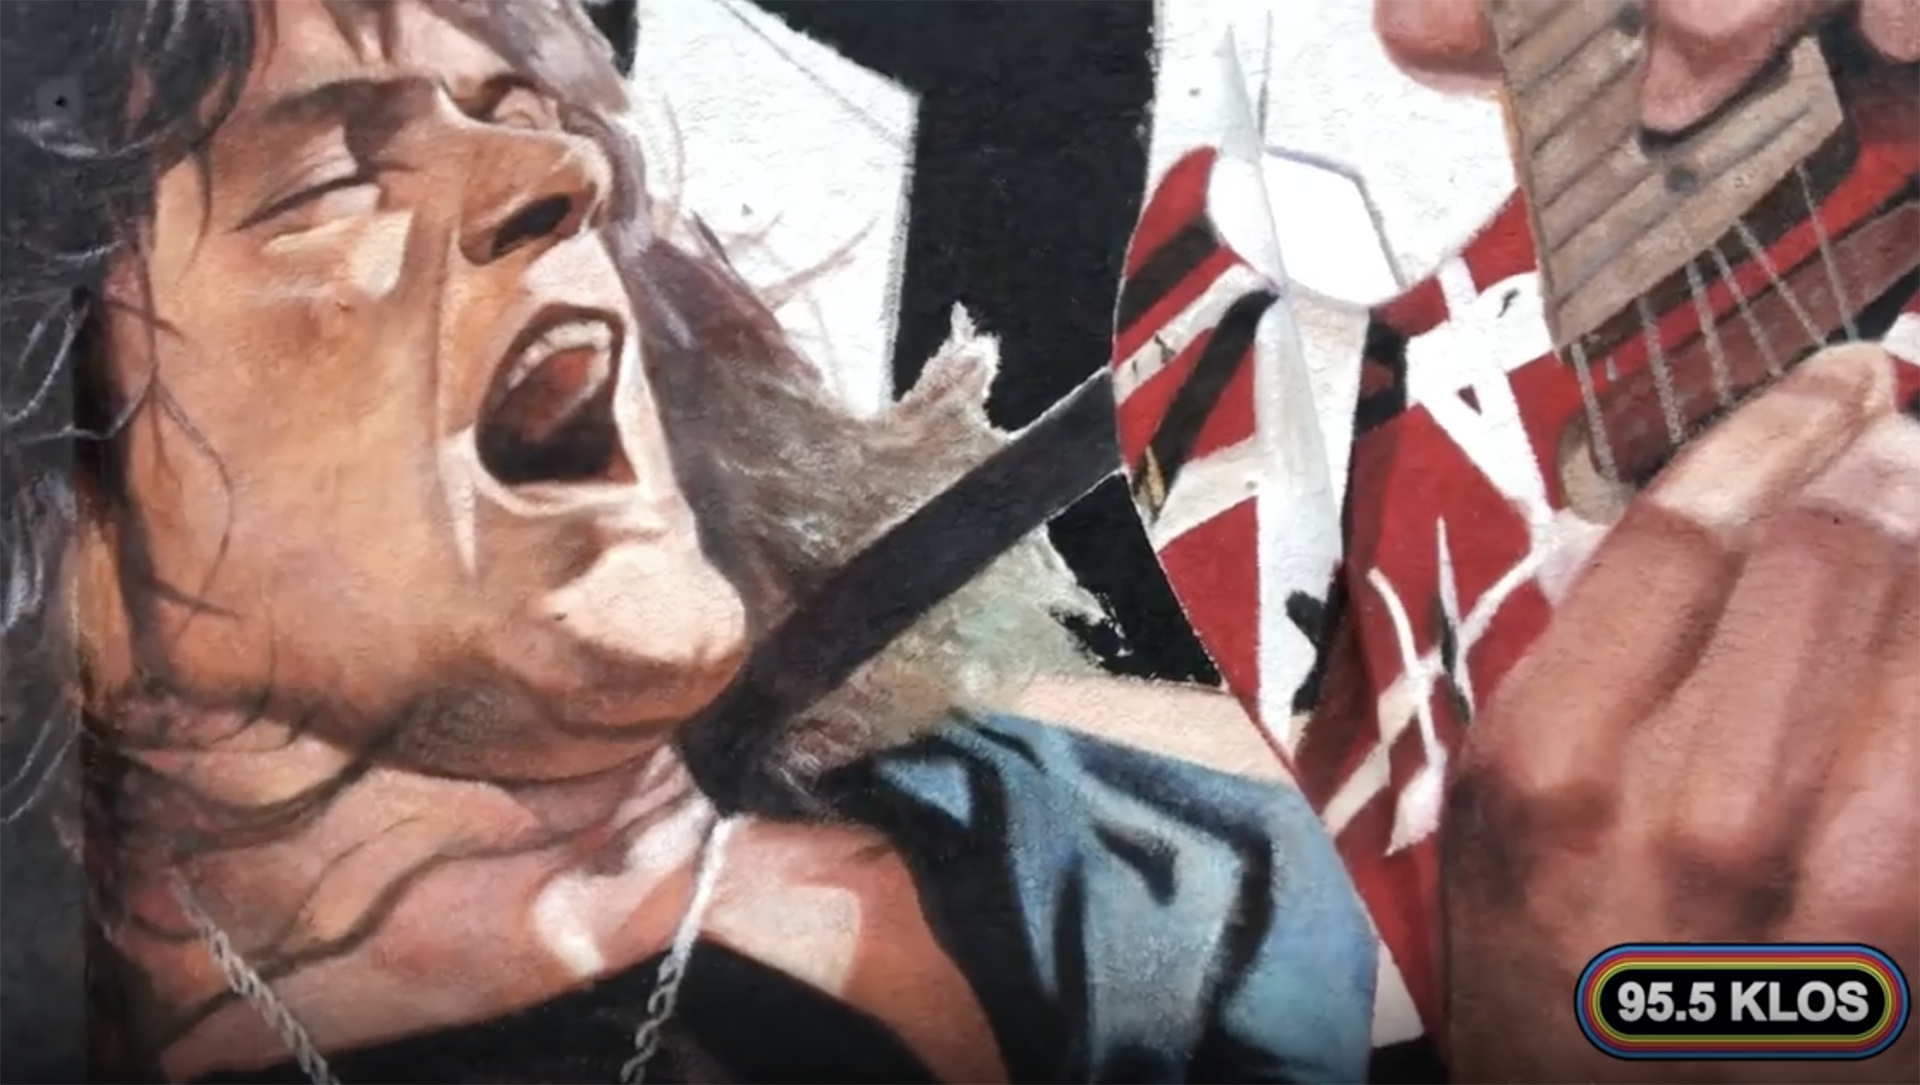 Mural Of The Late Eddie Van Halen Will Be Unveiled At Guitar Center